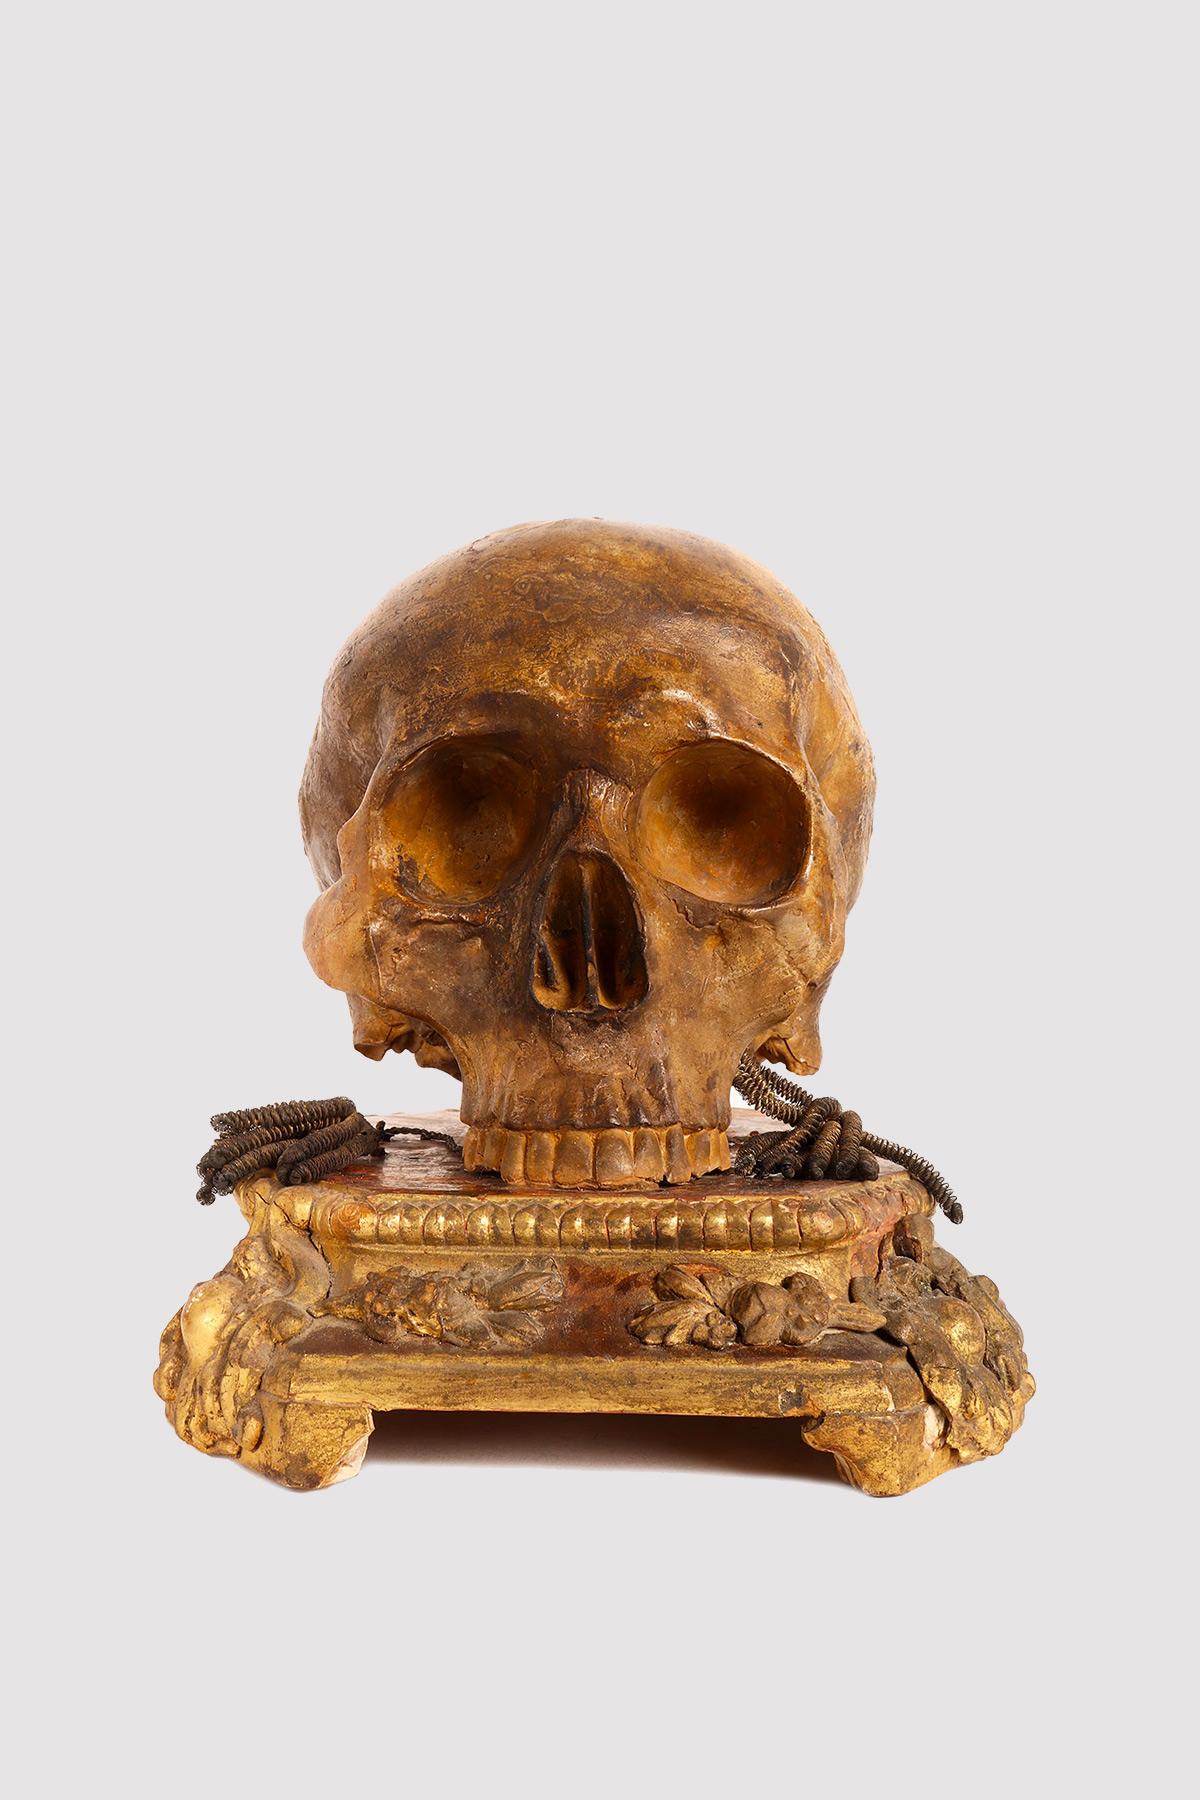 Above the gilded wooden base is a Vanitas, a painted plaster sculpture depicting a human skull. Italy early 19th century.